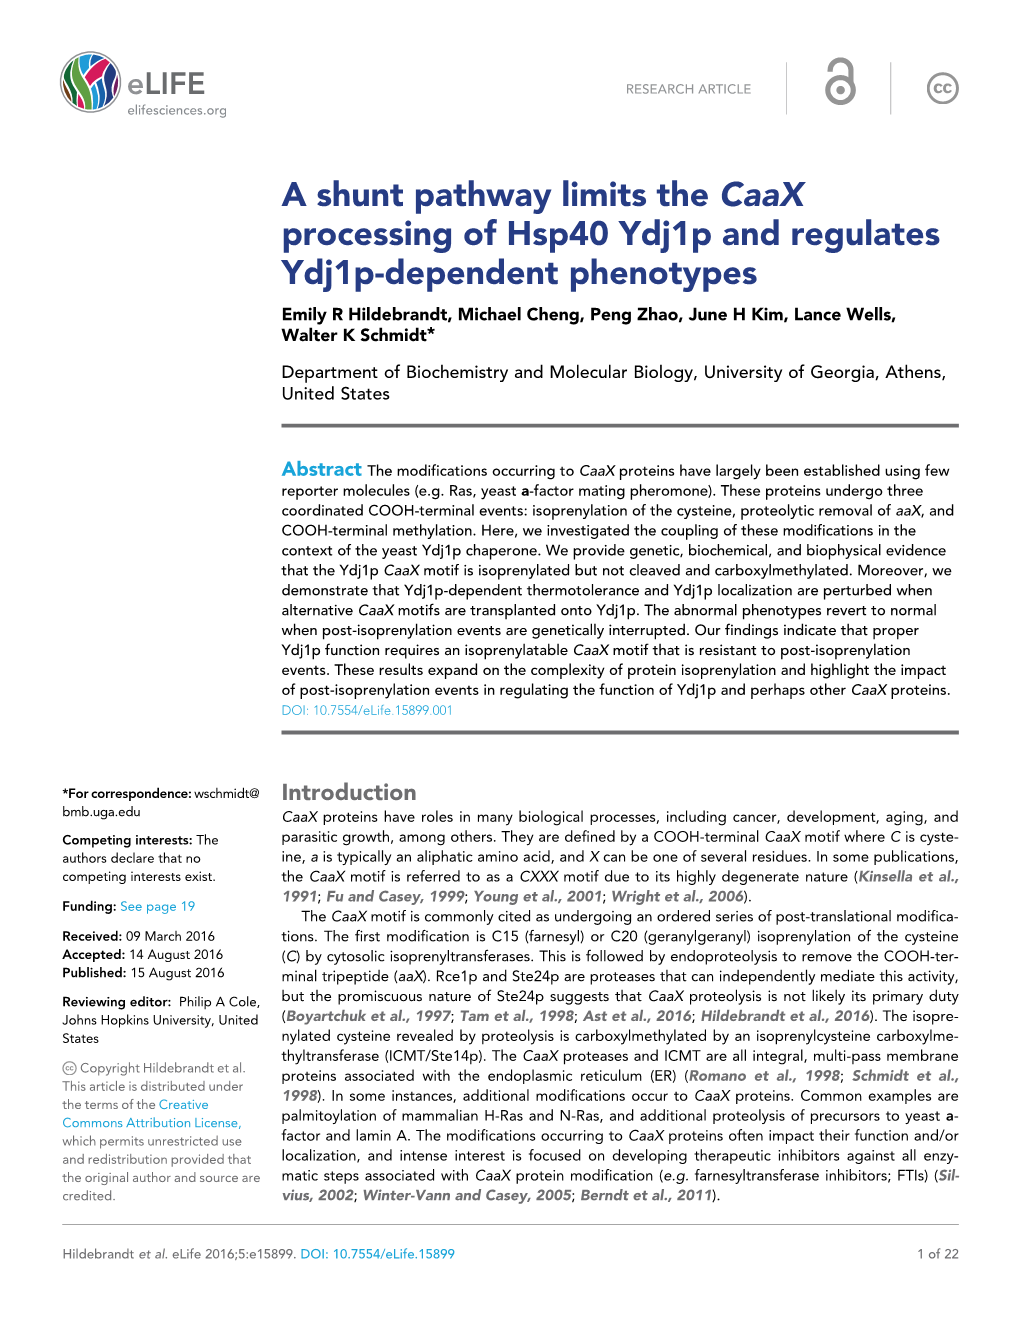 A Shunt Pathway Limits the Caax Processing of Hsp40 Ydj1p